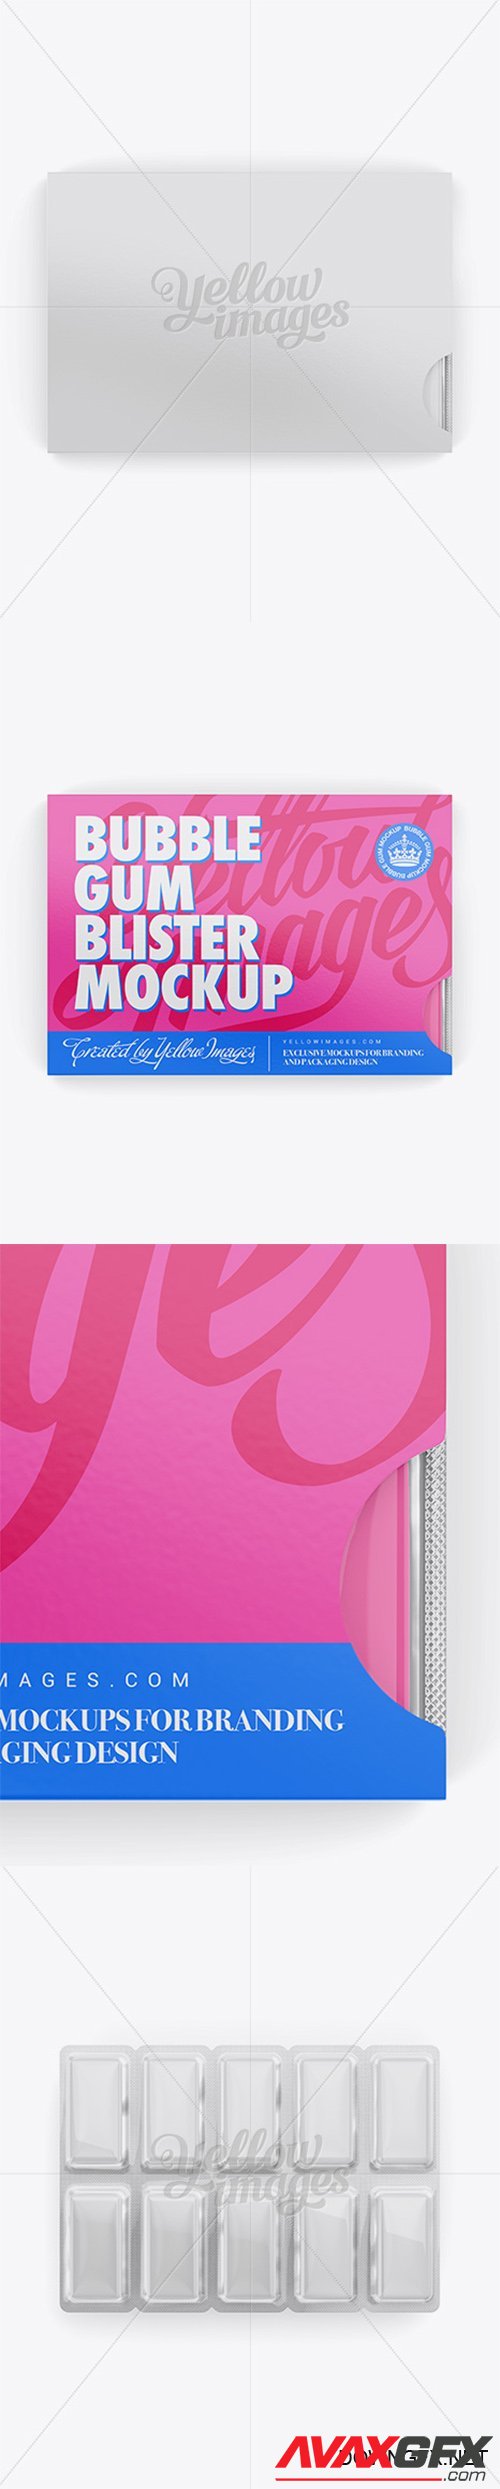 Chewing Gum Blister Package Mockup - Top View 13296